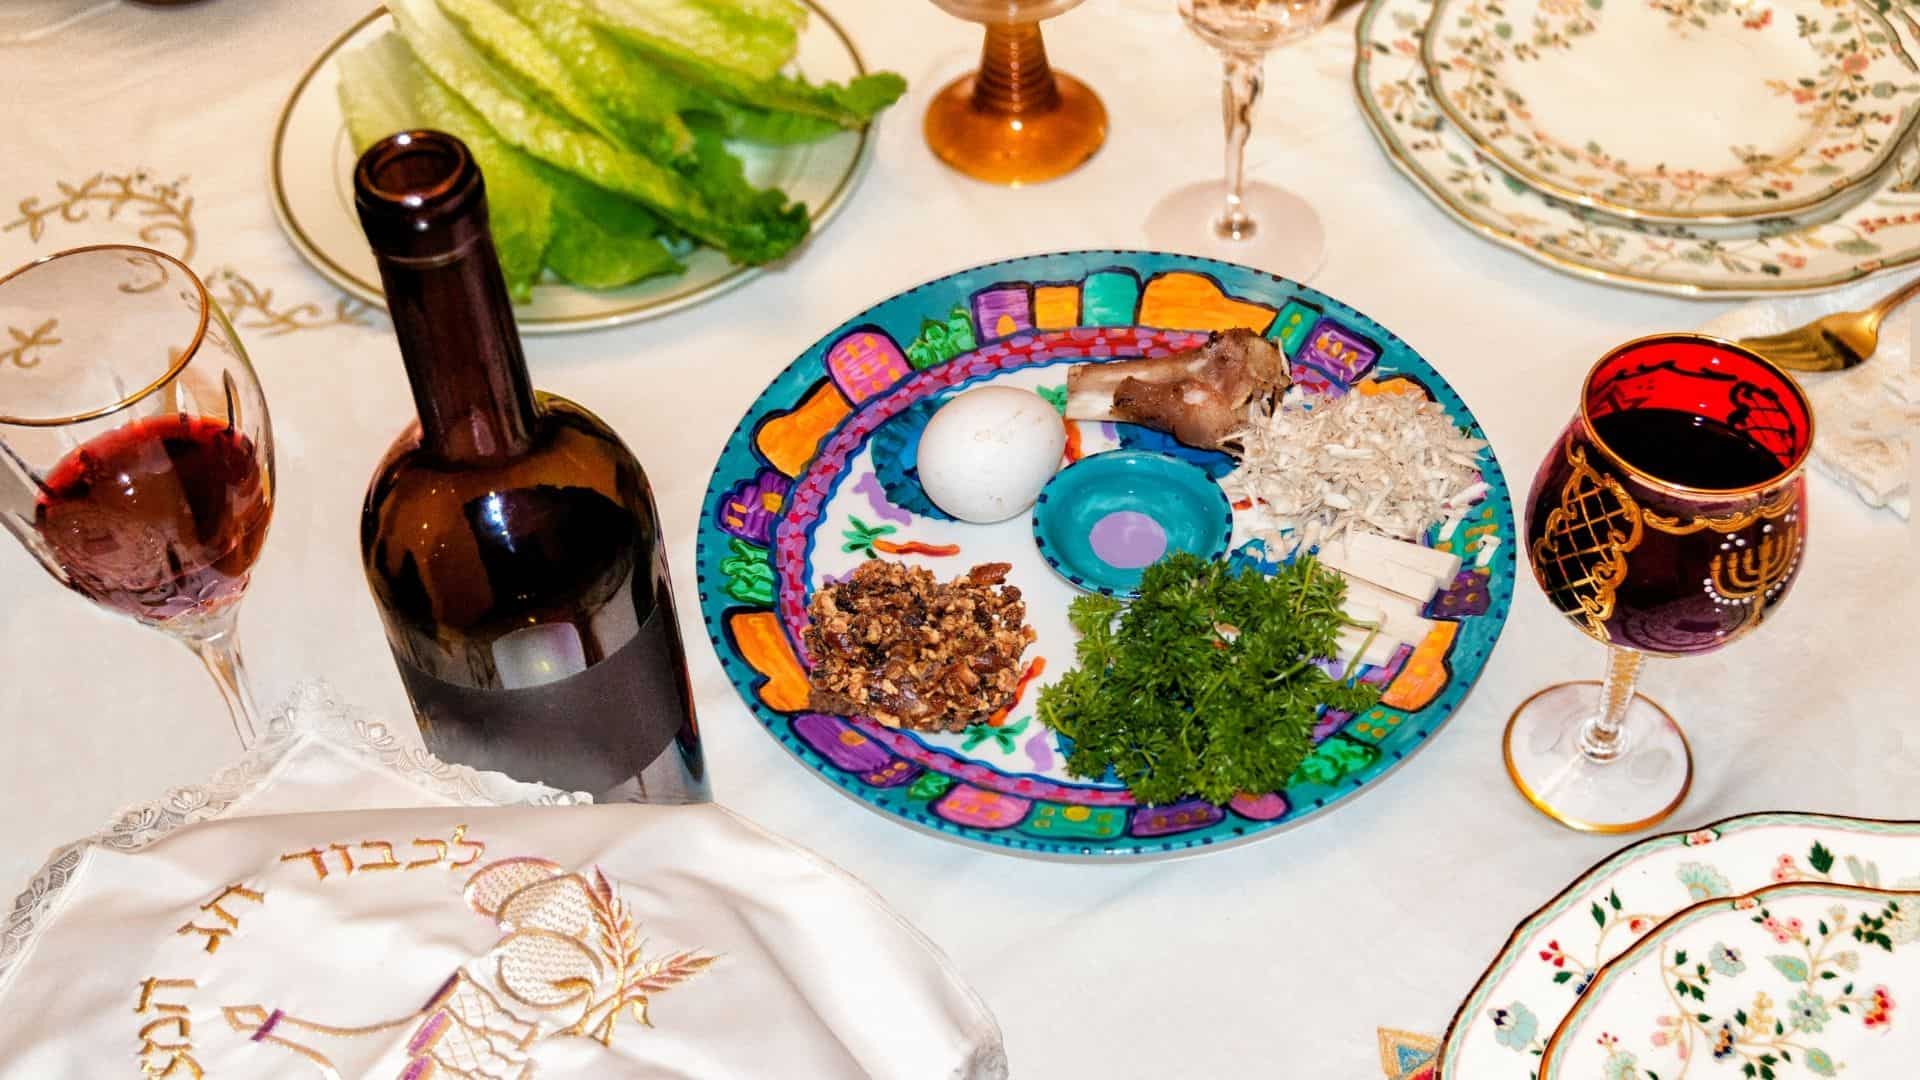 11 Fun Passover Seder Ideas to Enrich Your Pesach Meal B'nai Mitzvah